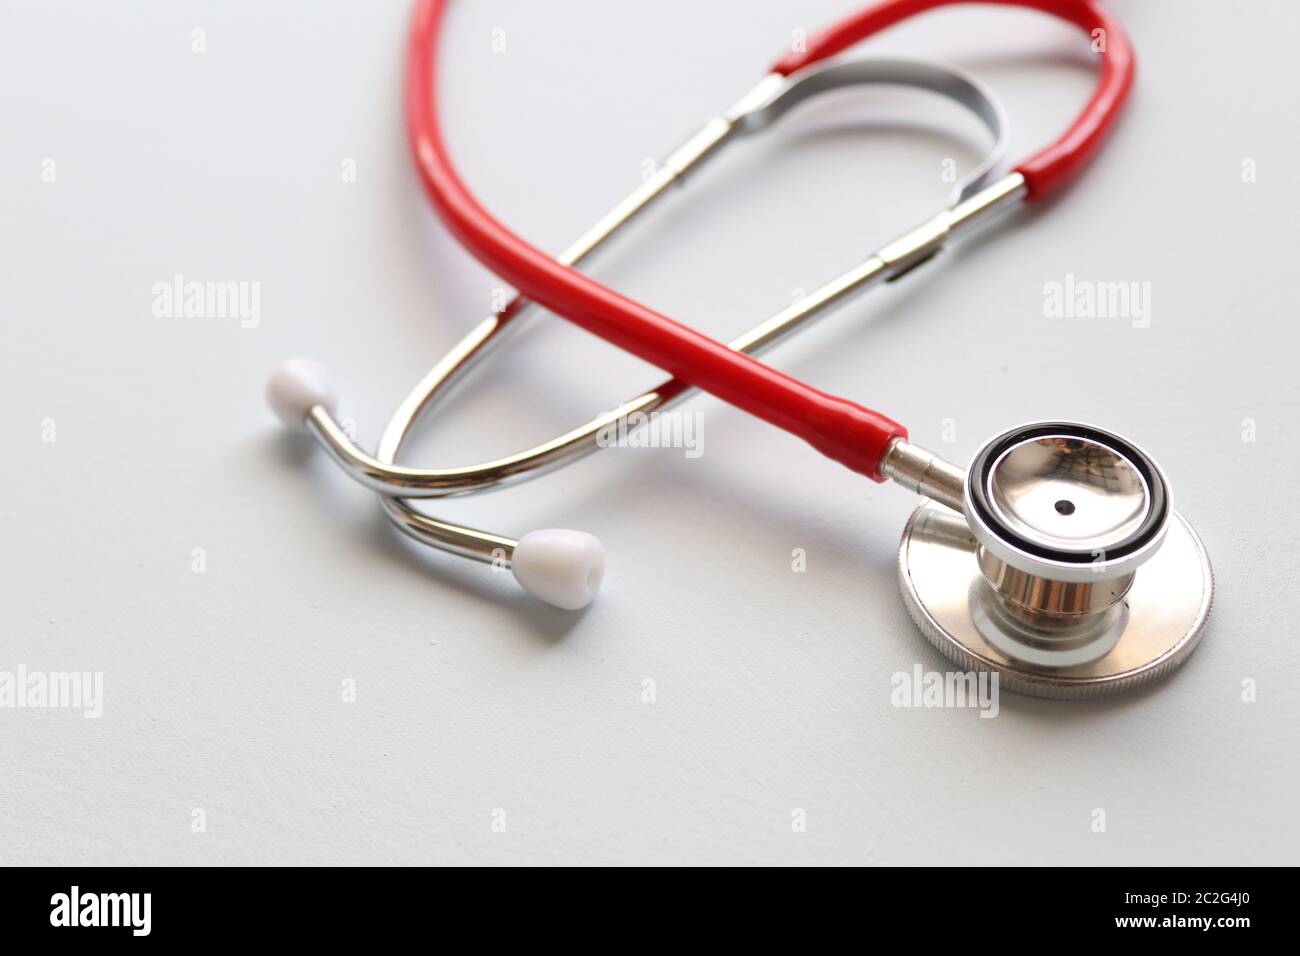 Red stethoscope on a grey background.This is an acoustic medical device for auscultation, or listening to the internal sounds of an animal or human Stock Photo